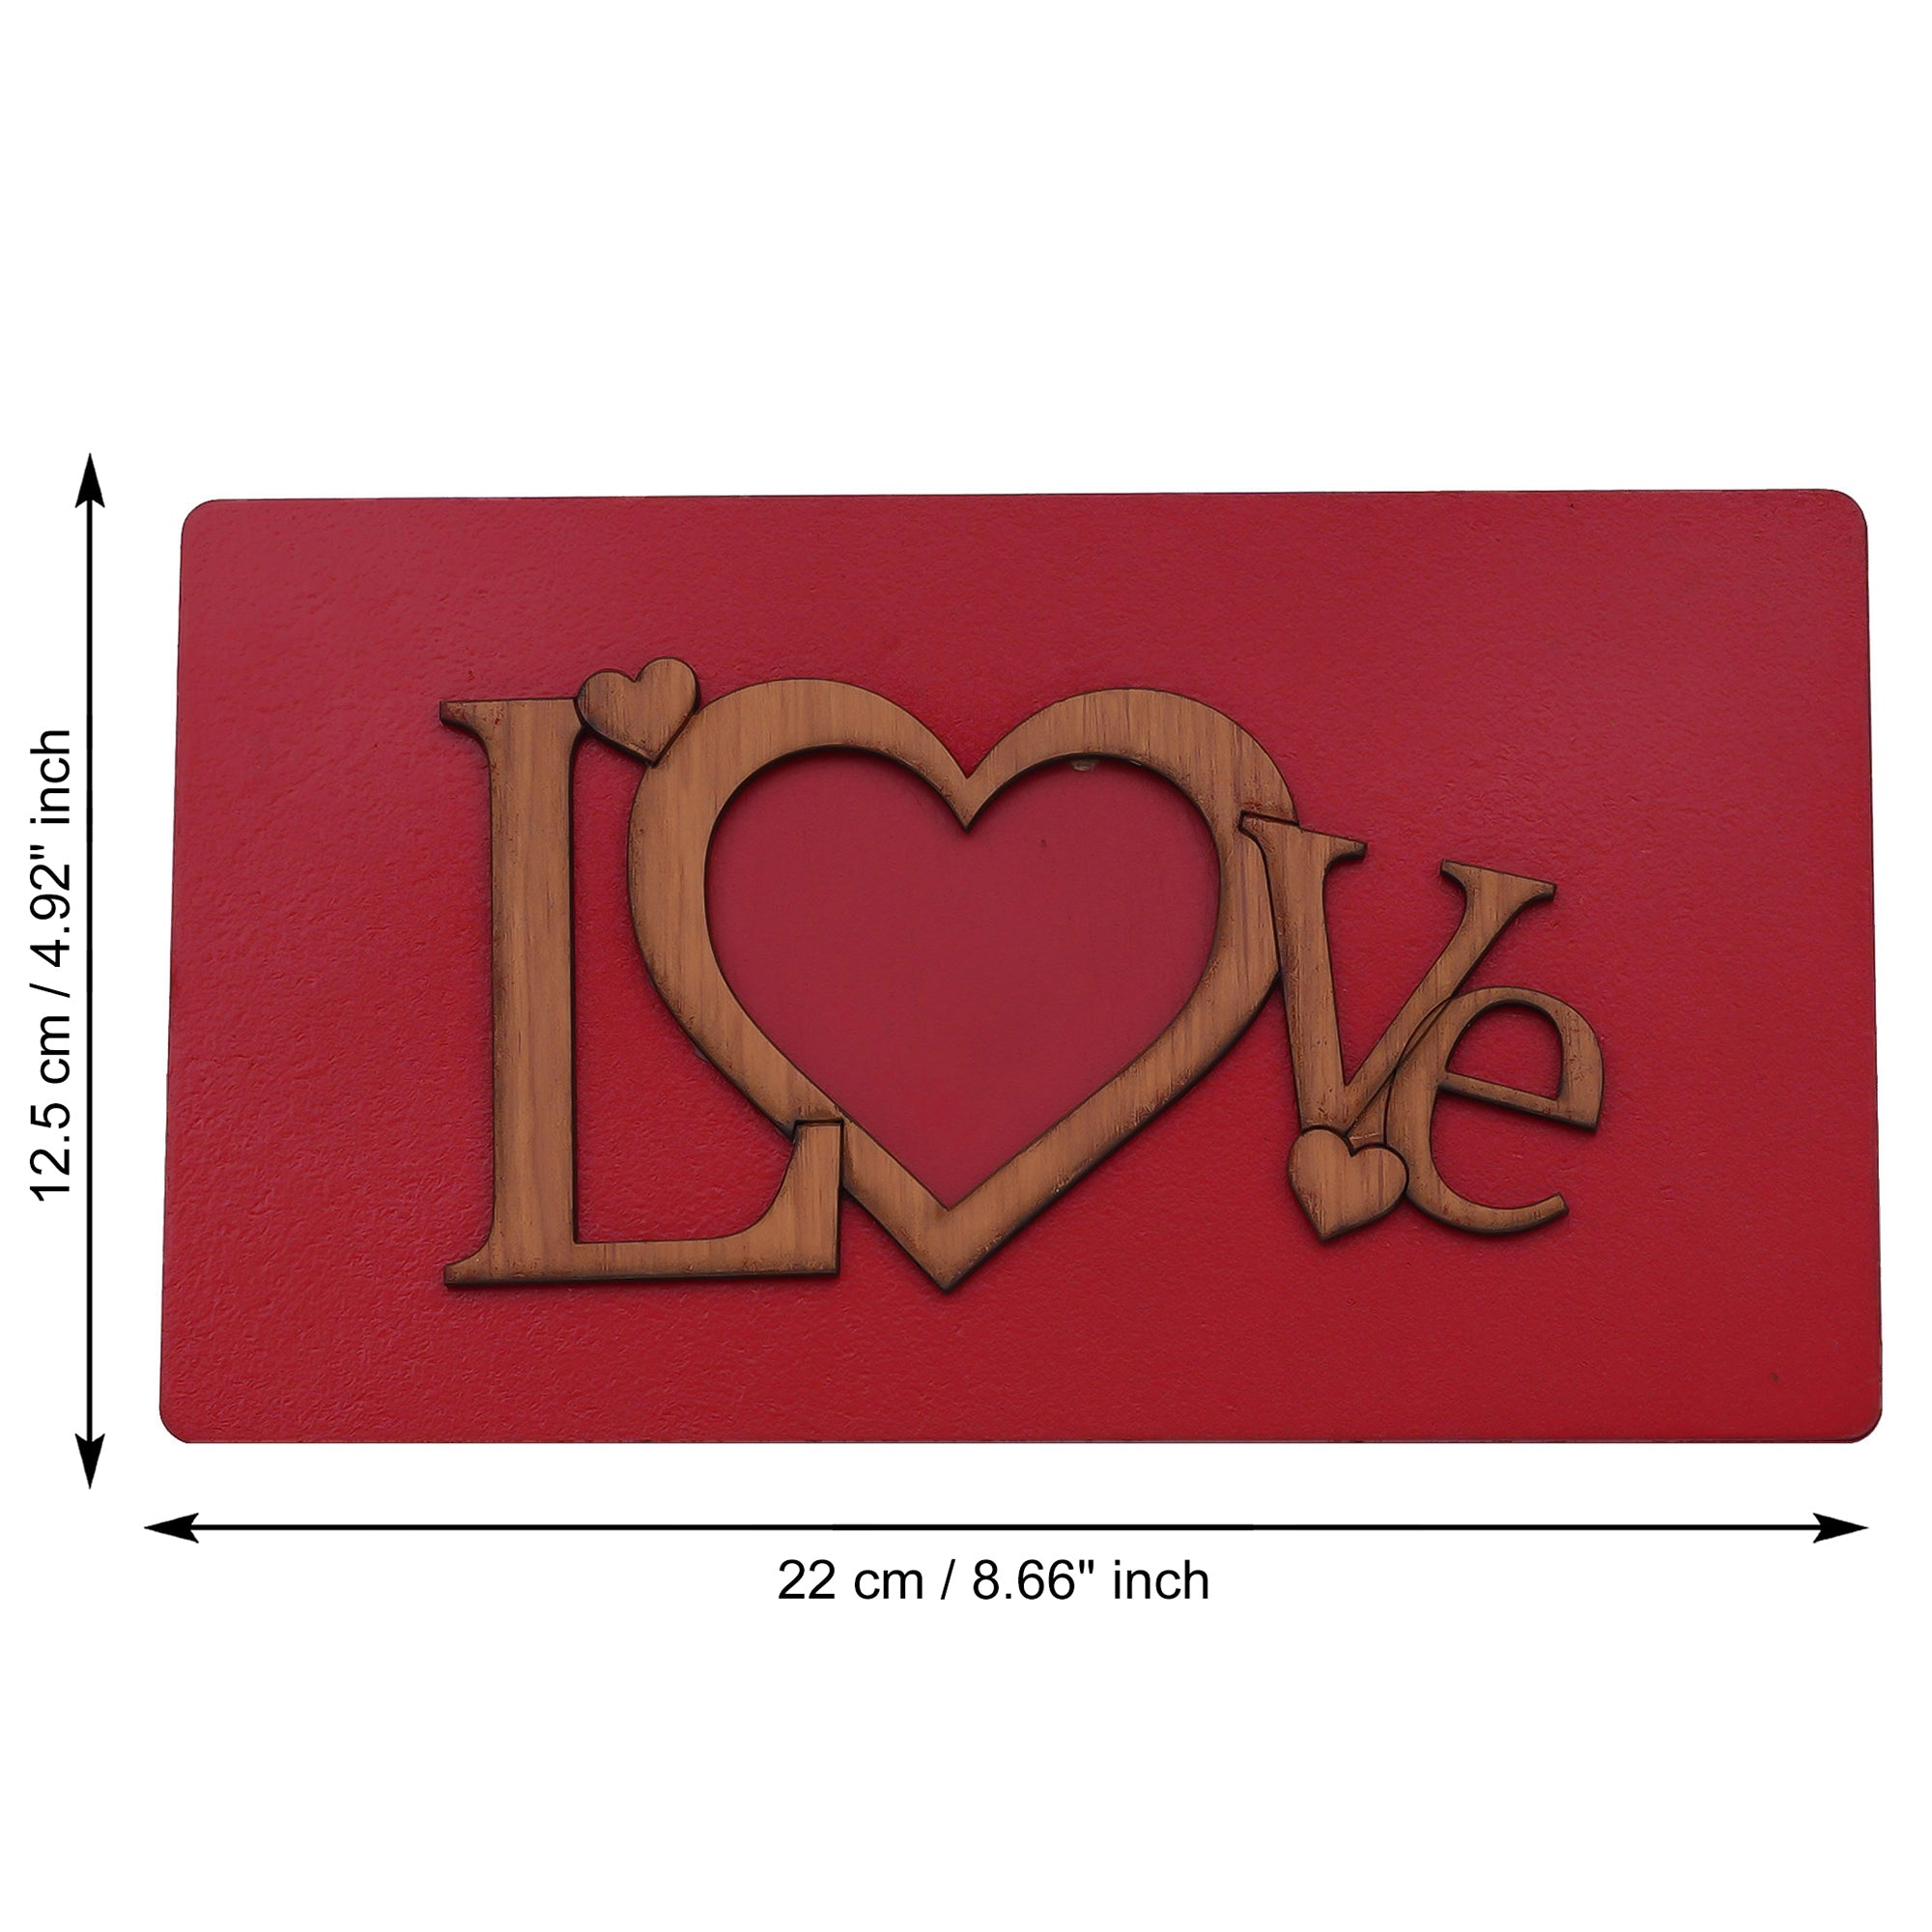 Valentine Combo of "Love" Wooden Photo Frame With Red Stand, Bride Kissing Groom Romantic Polyresin Decorative Showpiece 2